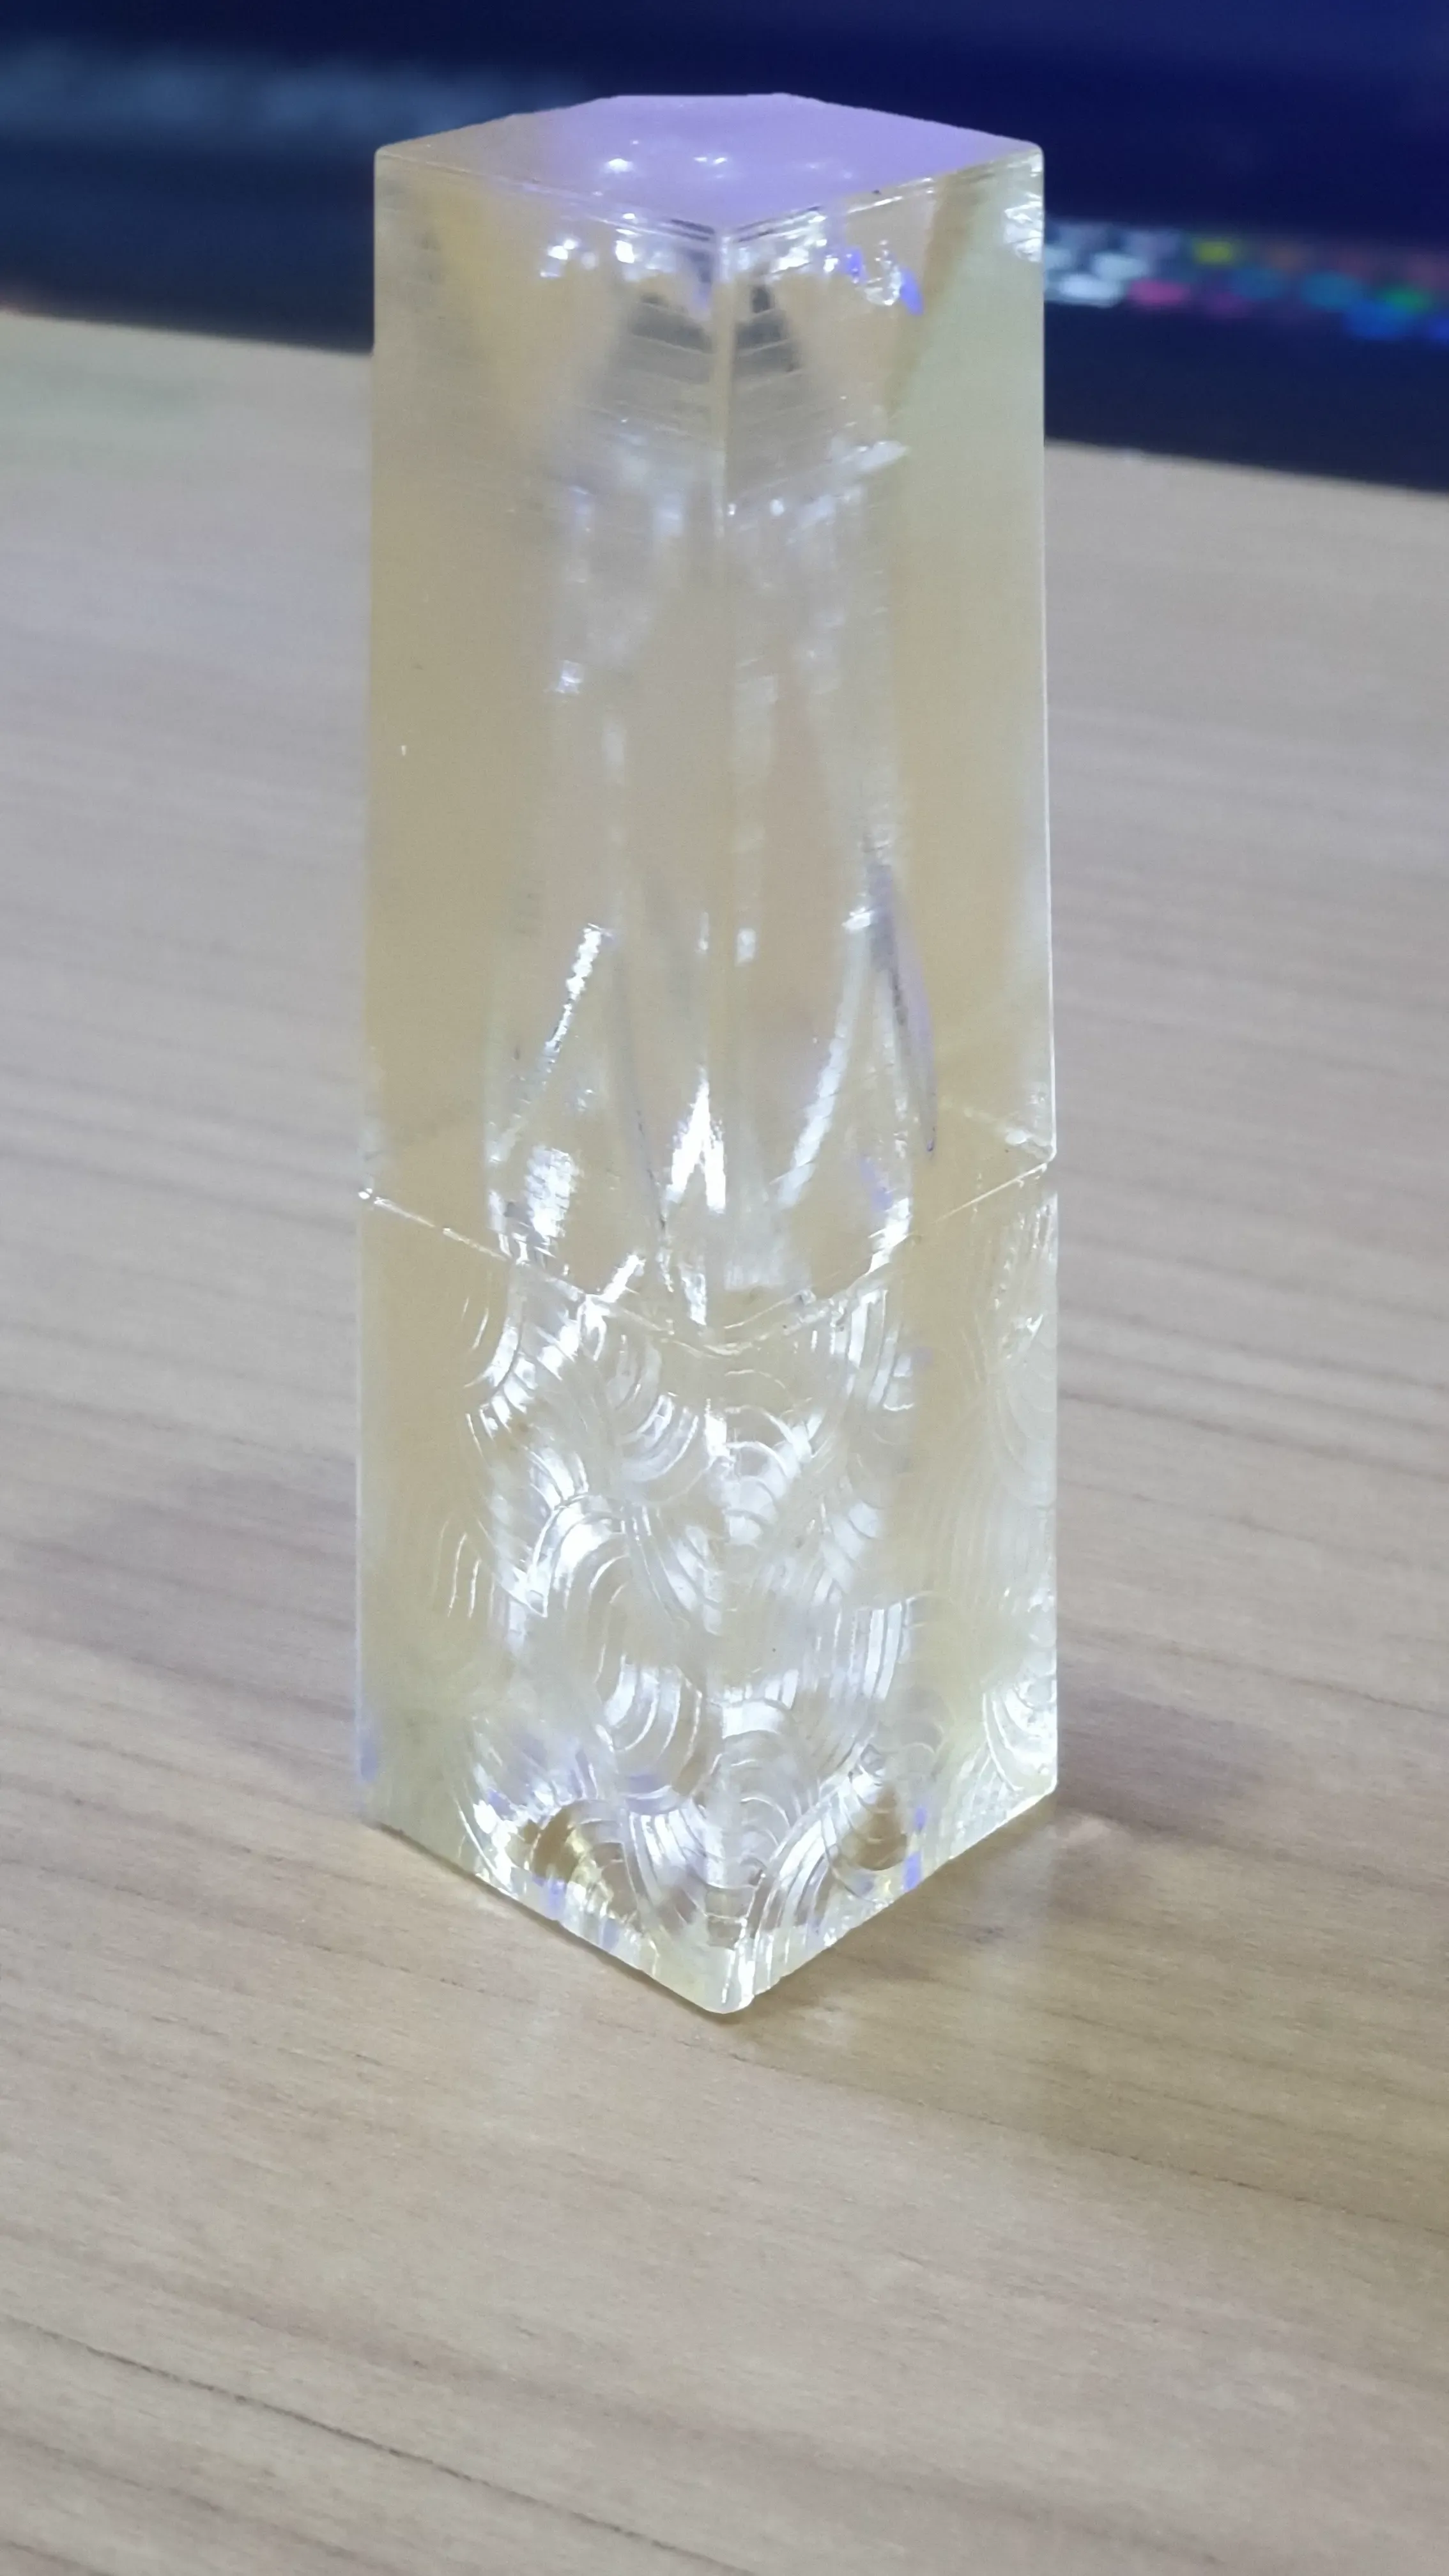 Transparent Trophy with Resin